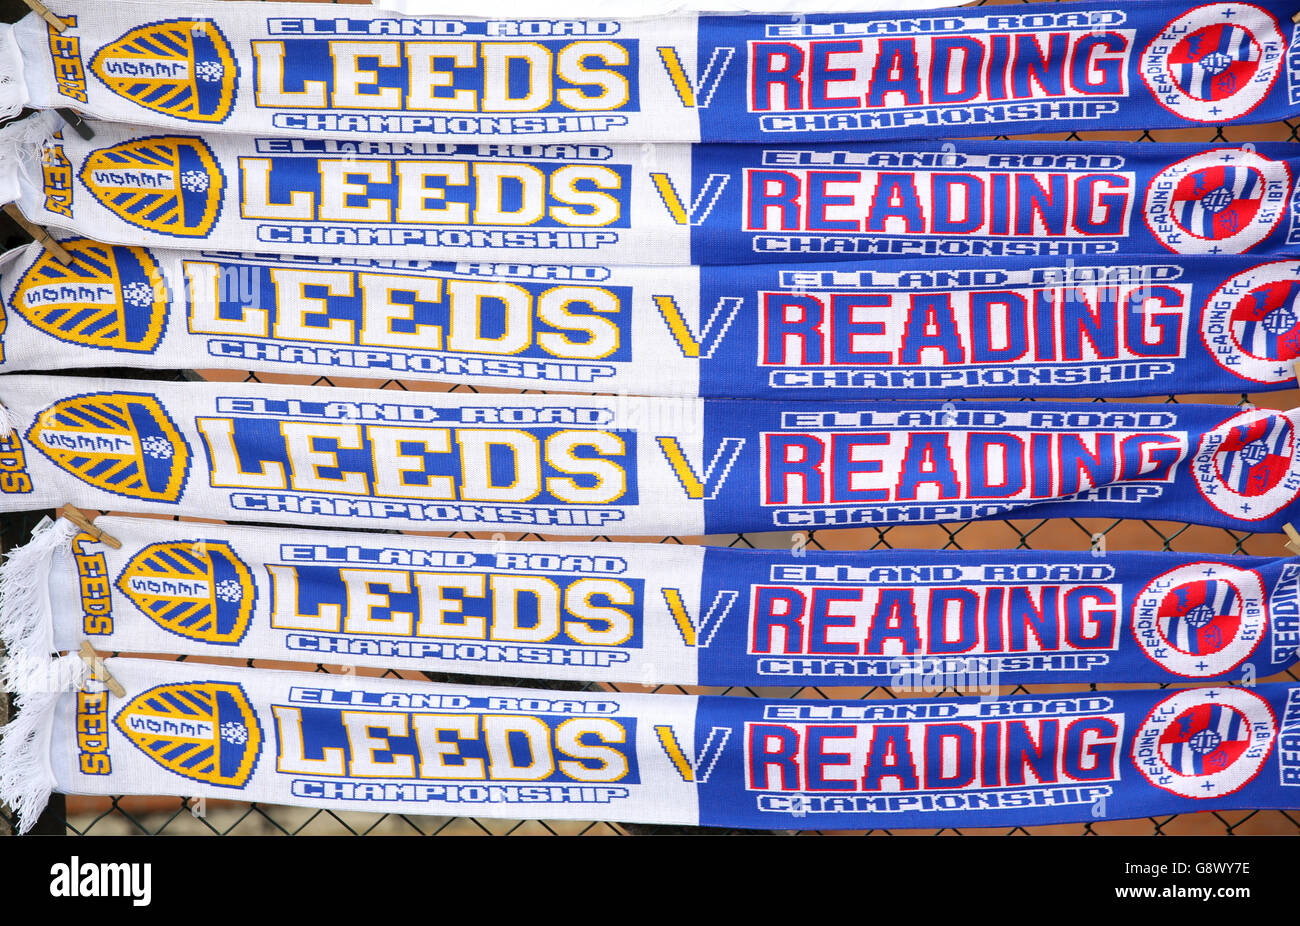 Leeds United v Reading - Sky Bet Championship - Elland Road. A general view of Half and Half Leeds v Reading scarves at a merchandise stand Stock Photo